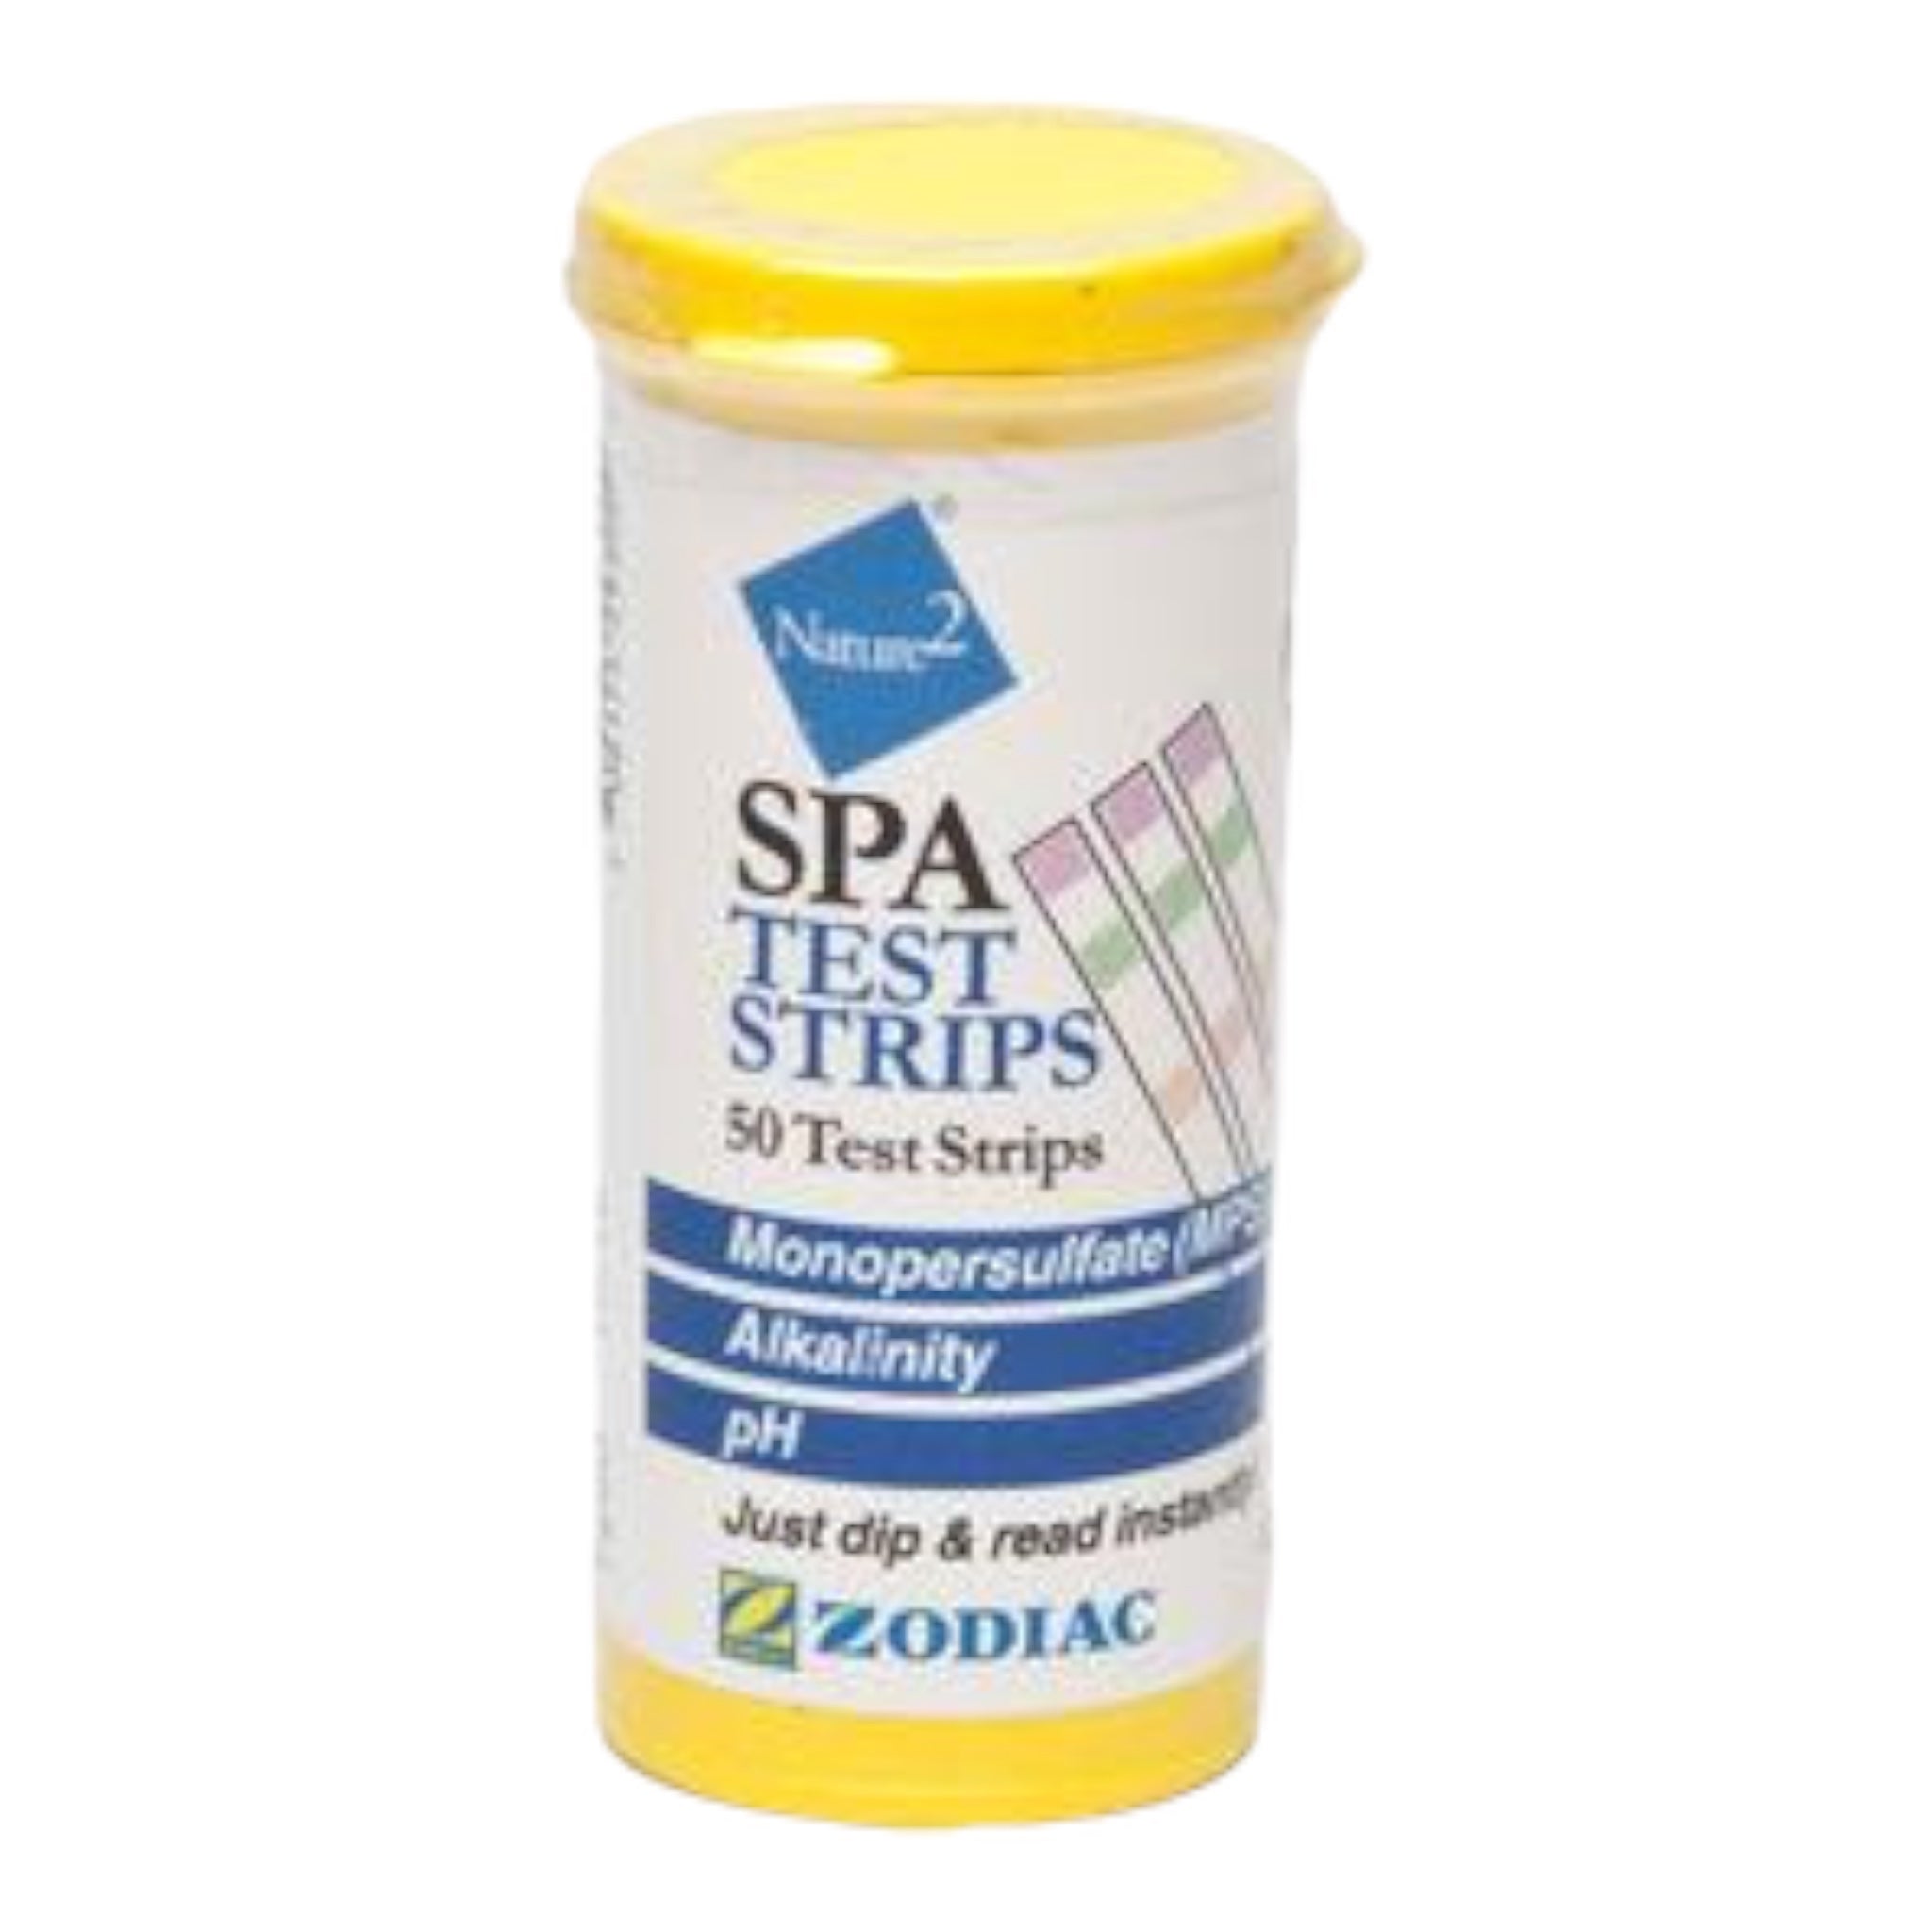 Nature 2 Spa Test Strips